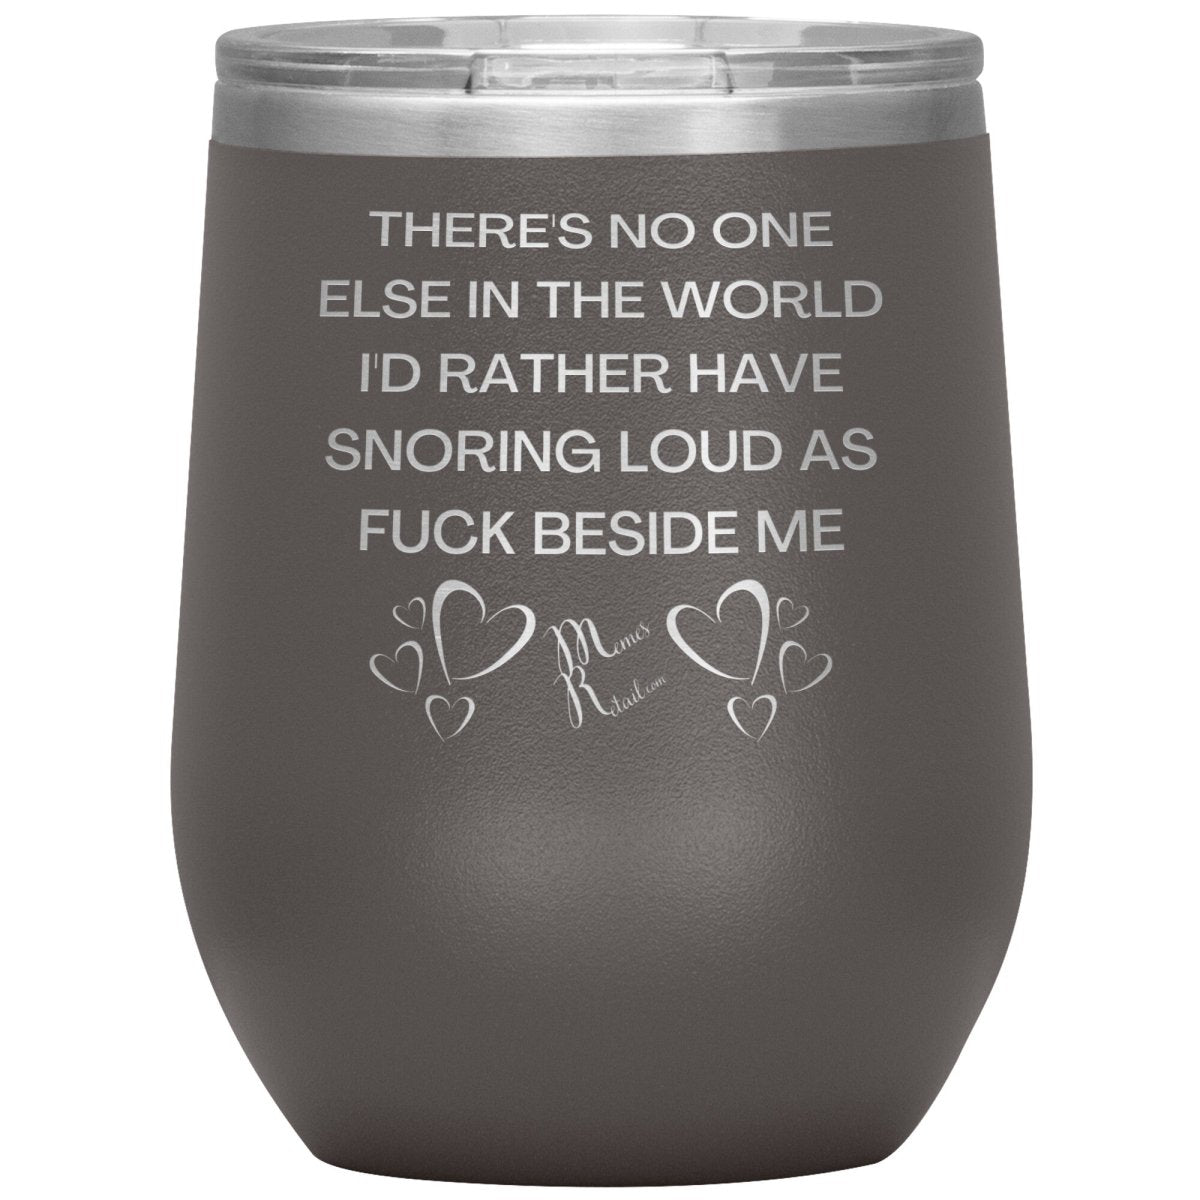 There's No One Else in the World I'd Rather Have Snoring Loud, 12oz Wine Insulated Tumbler / Pewter - MemesRetail.com